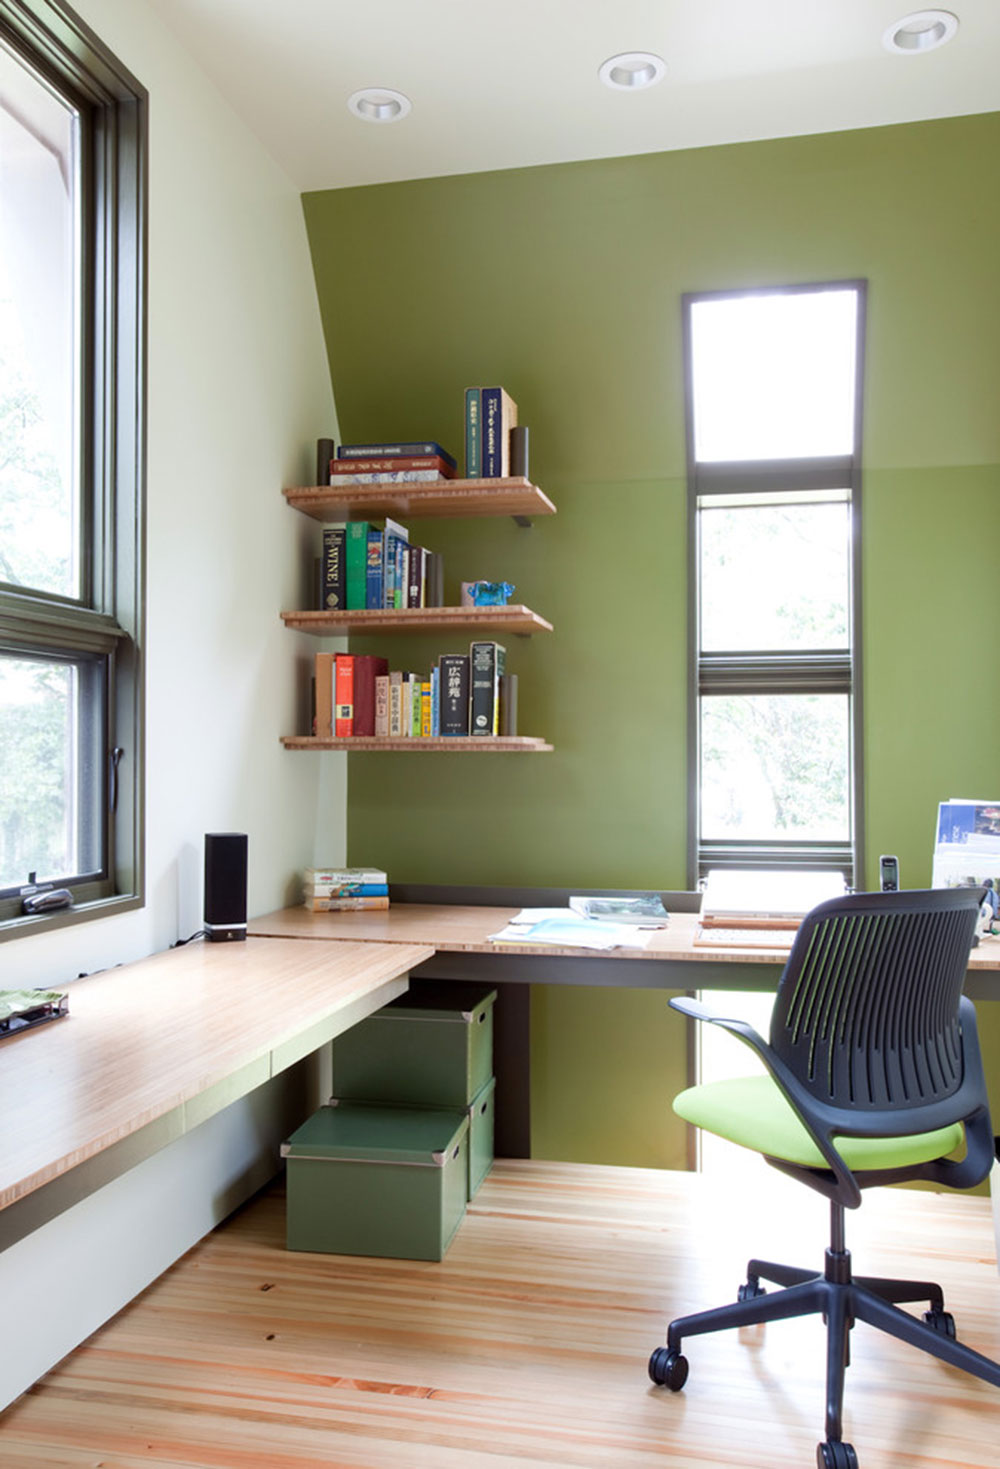 Decorating Your Study Room With Style11